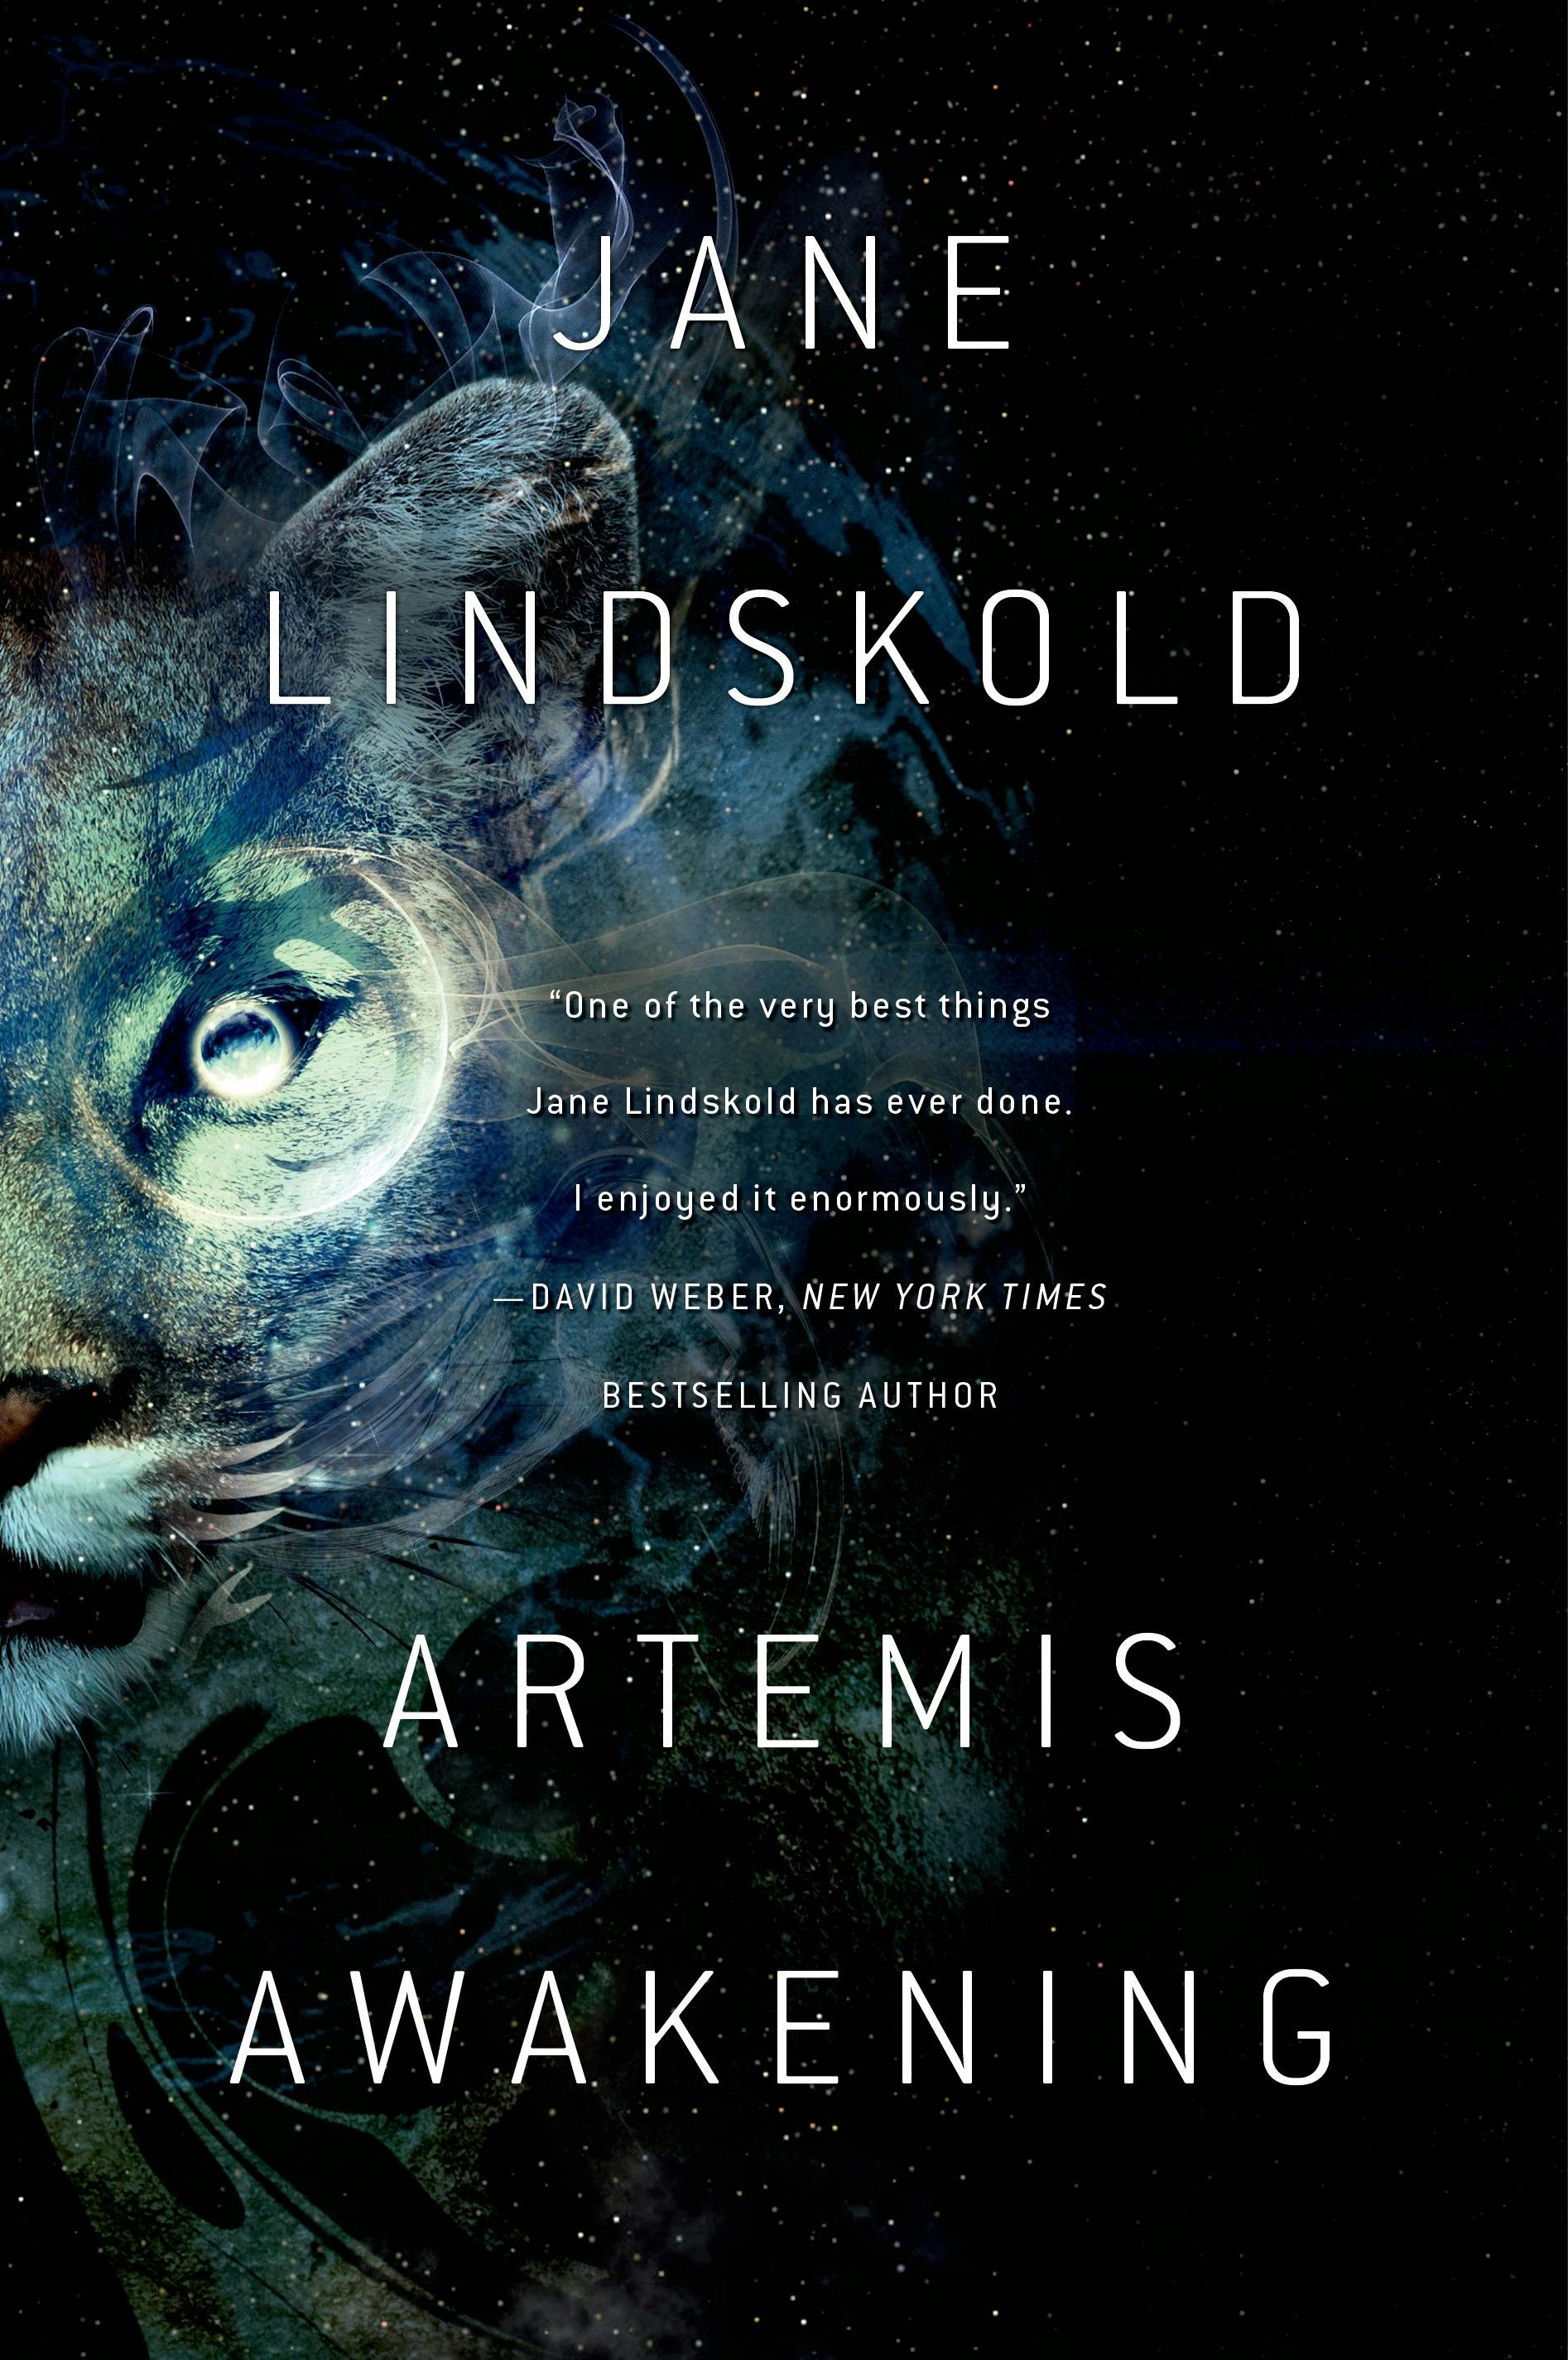 Cover for the book titled as: Artemis Awakening